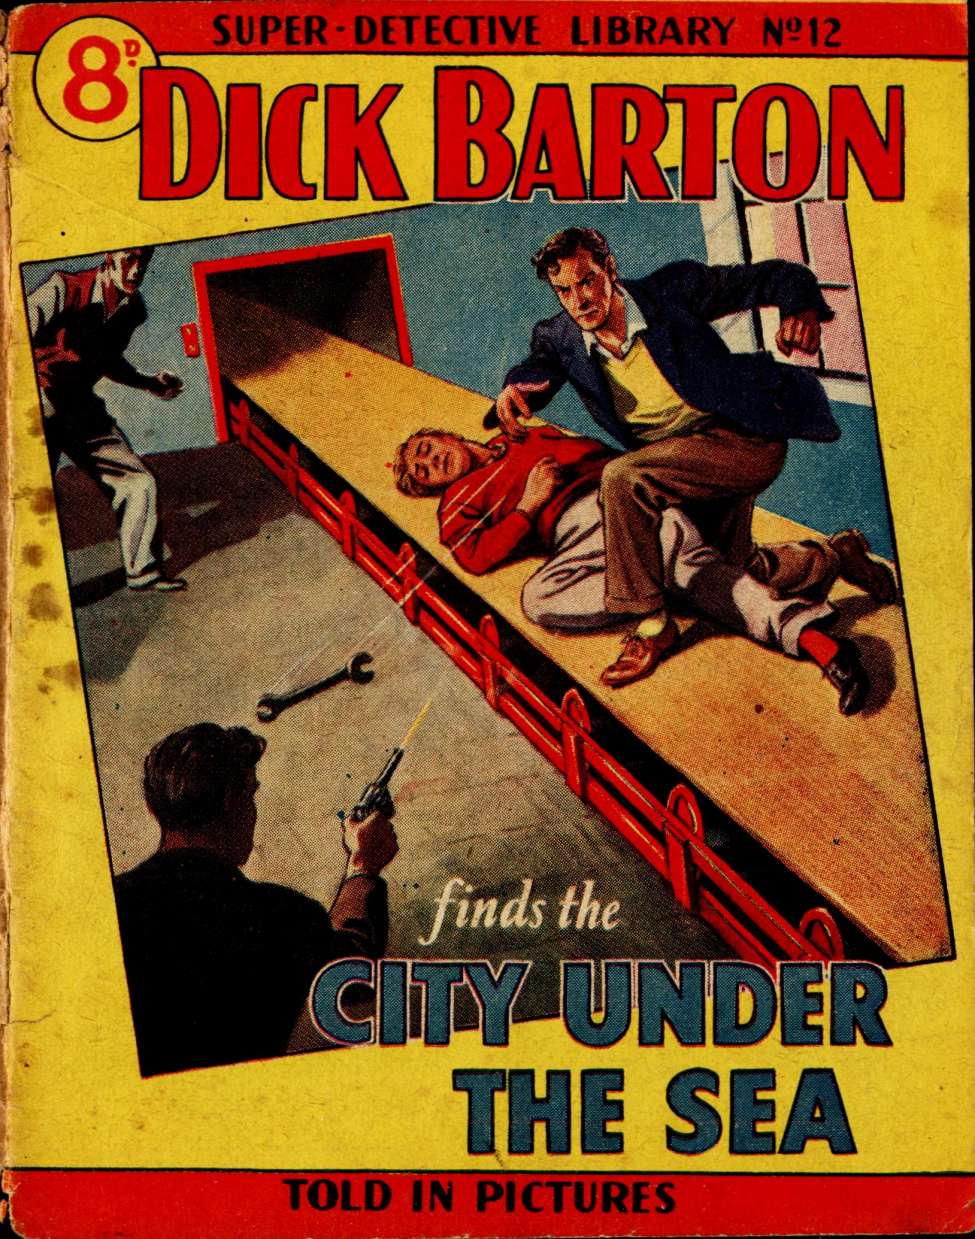 Book Cover For Super Detective Library 12 - Dick Barton finds the City Under The Sea